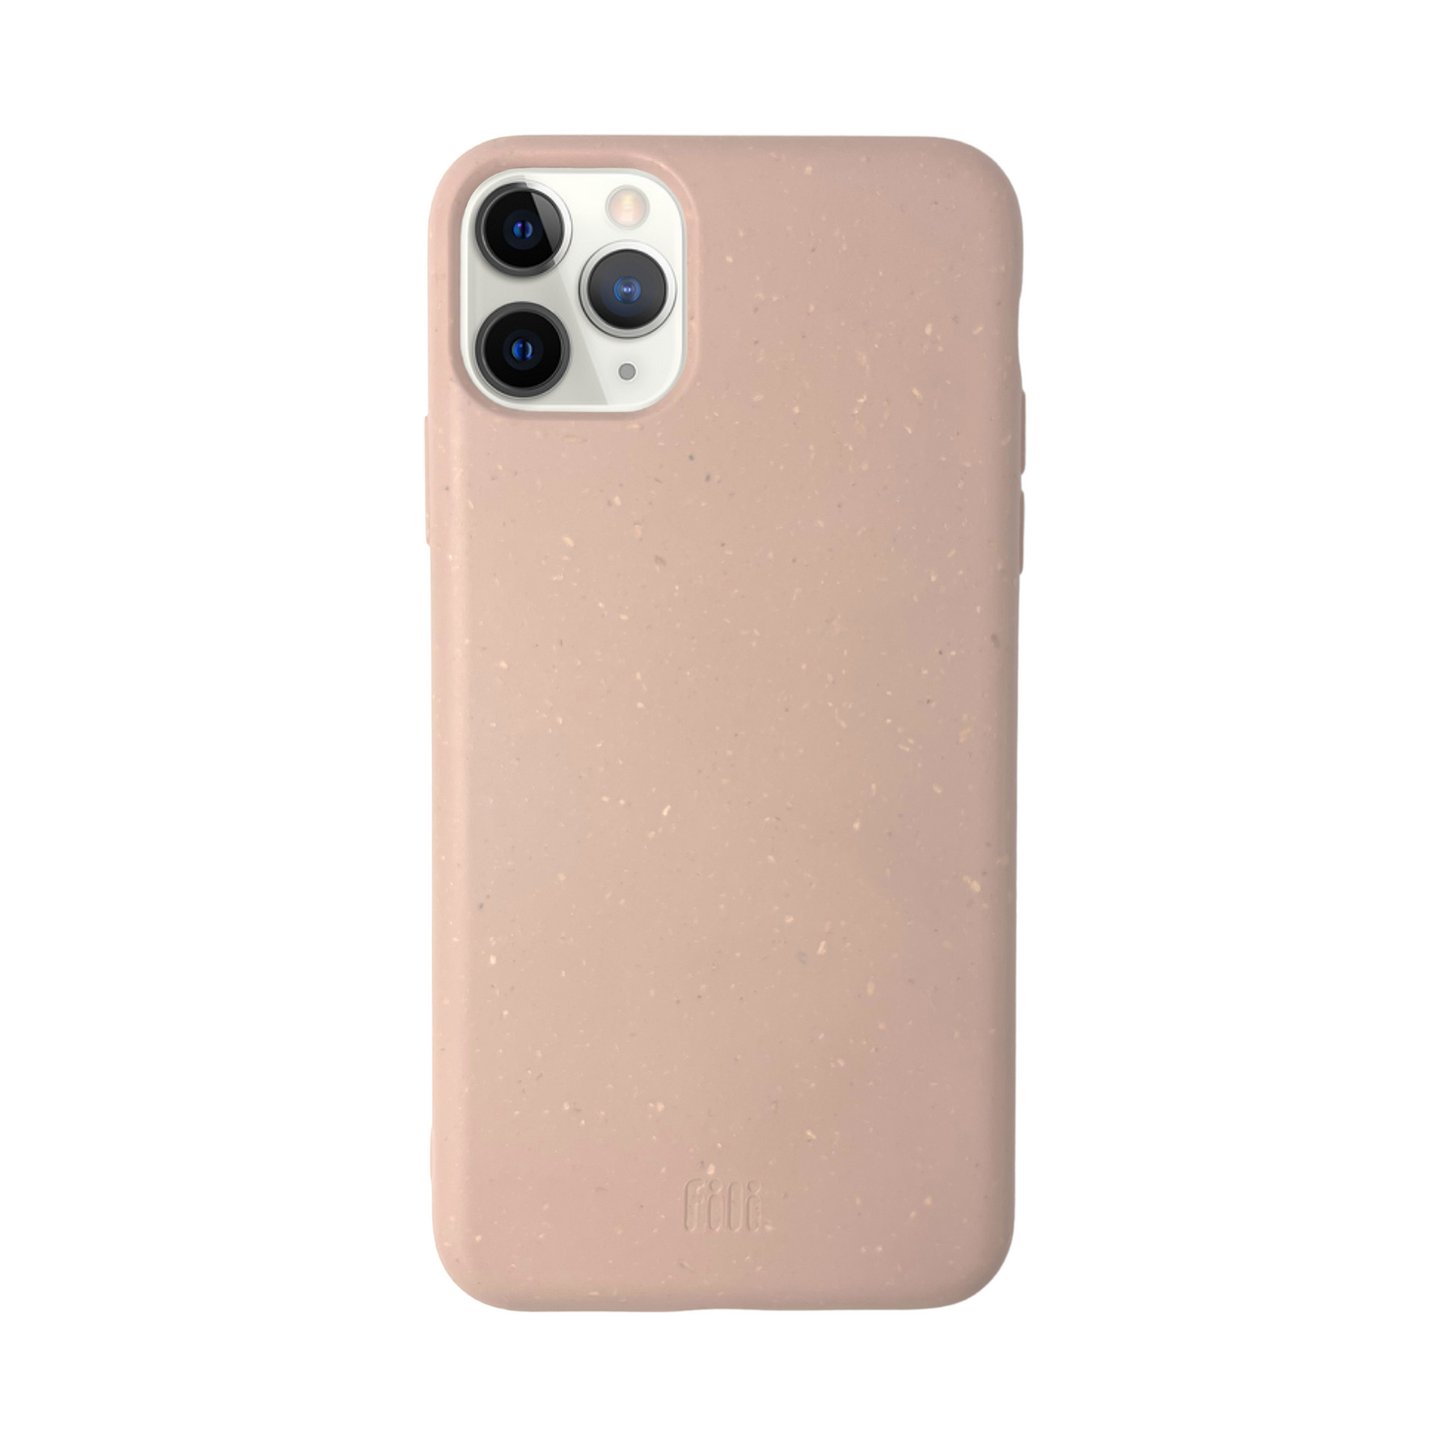 FILI Biodegradable Smooth iPhone 11 Pro Max Case